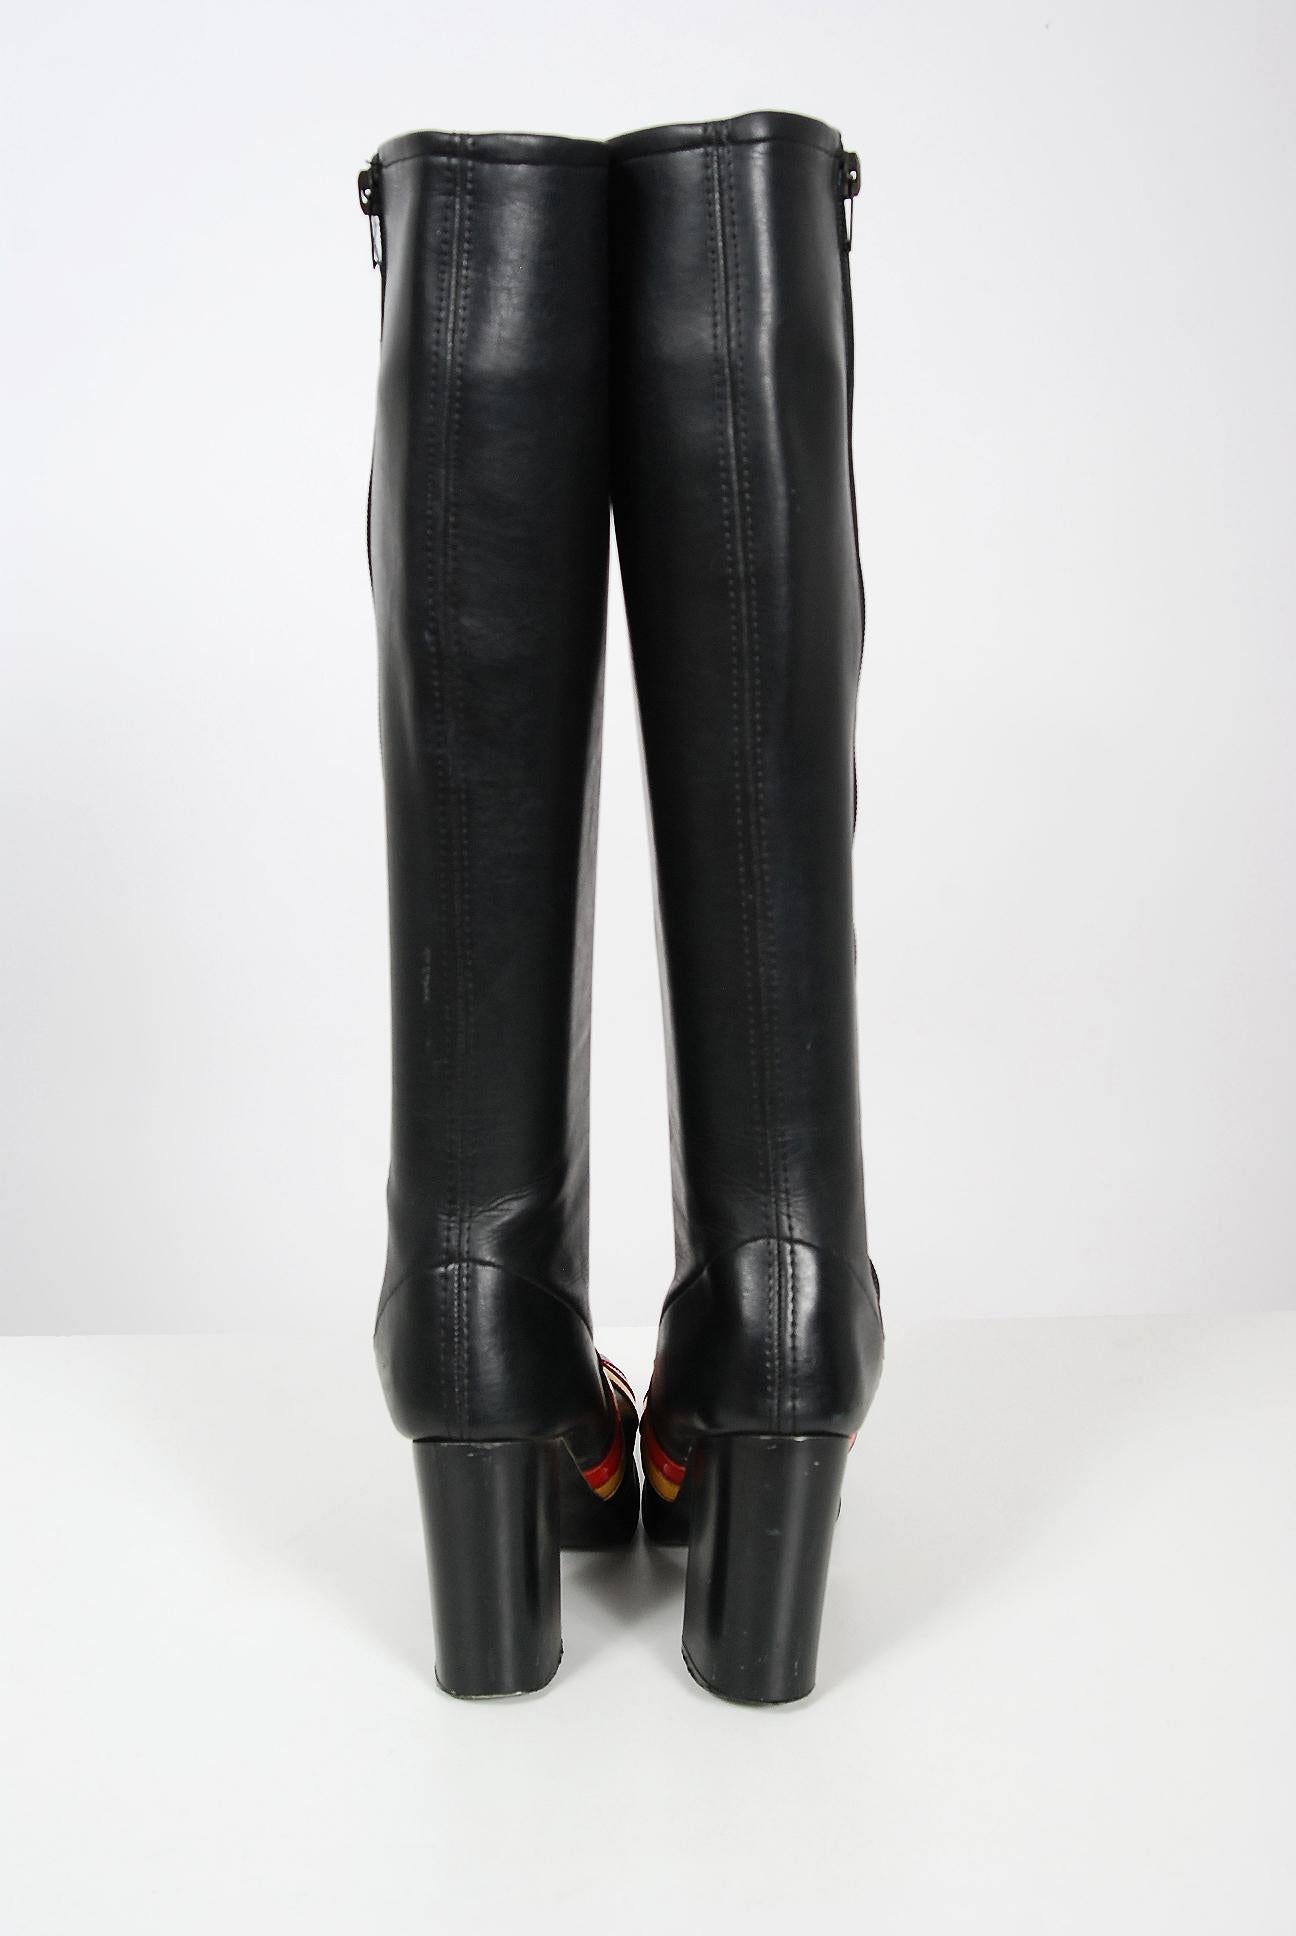 Vintage 1970's Red Yellow Stripe Black Vinyl Glam Rock Platform Knee-High Boots In Good Condition For Sale In Beverly Hills, CA